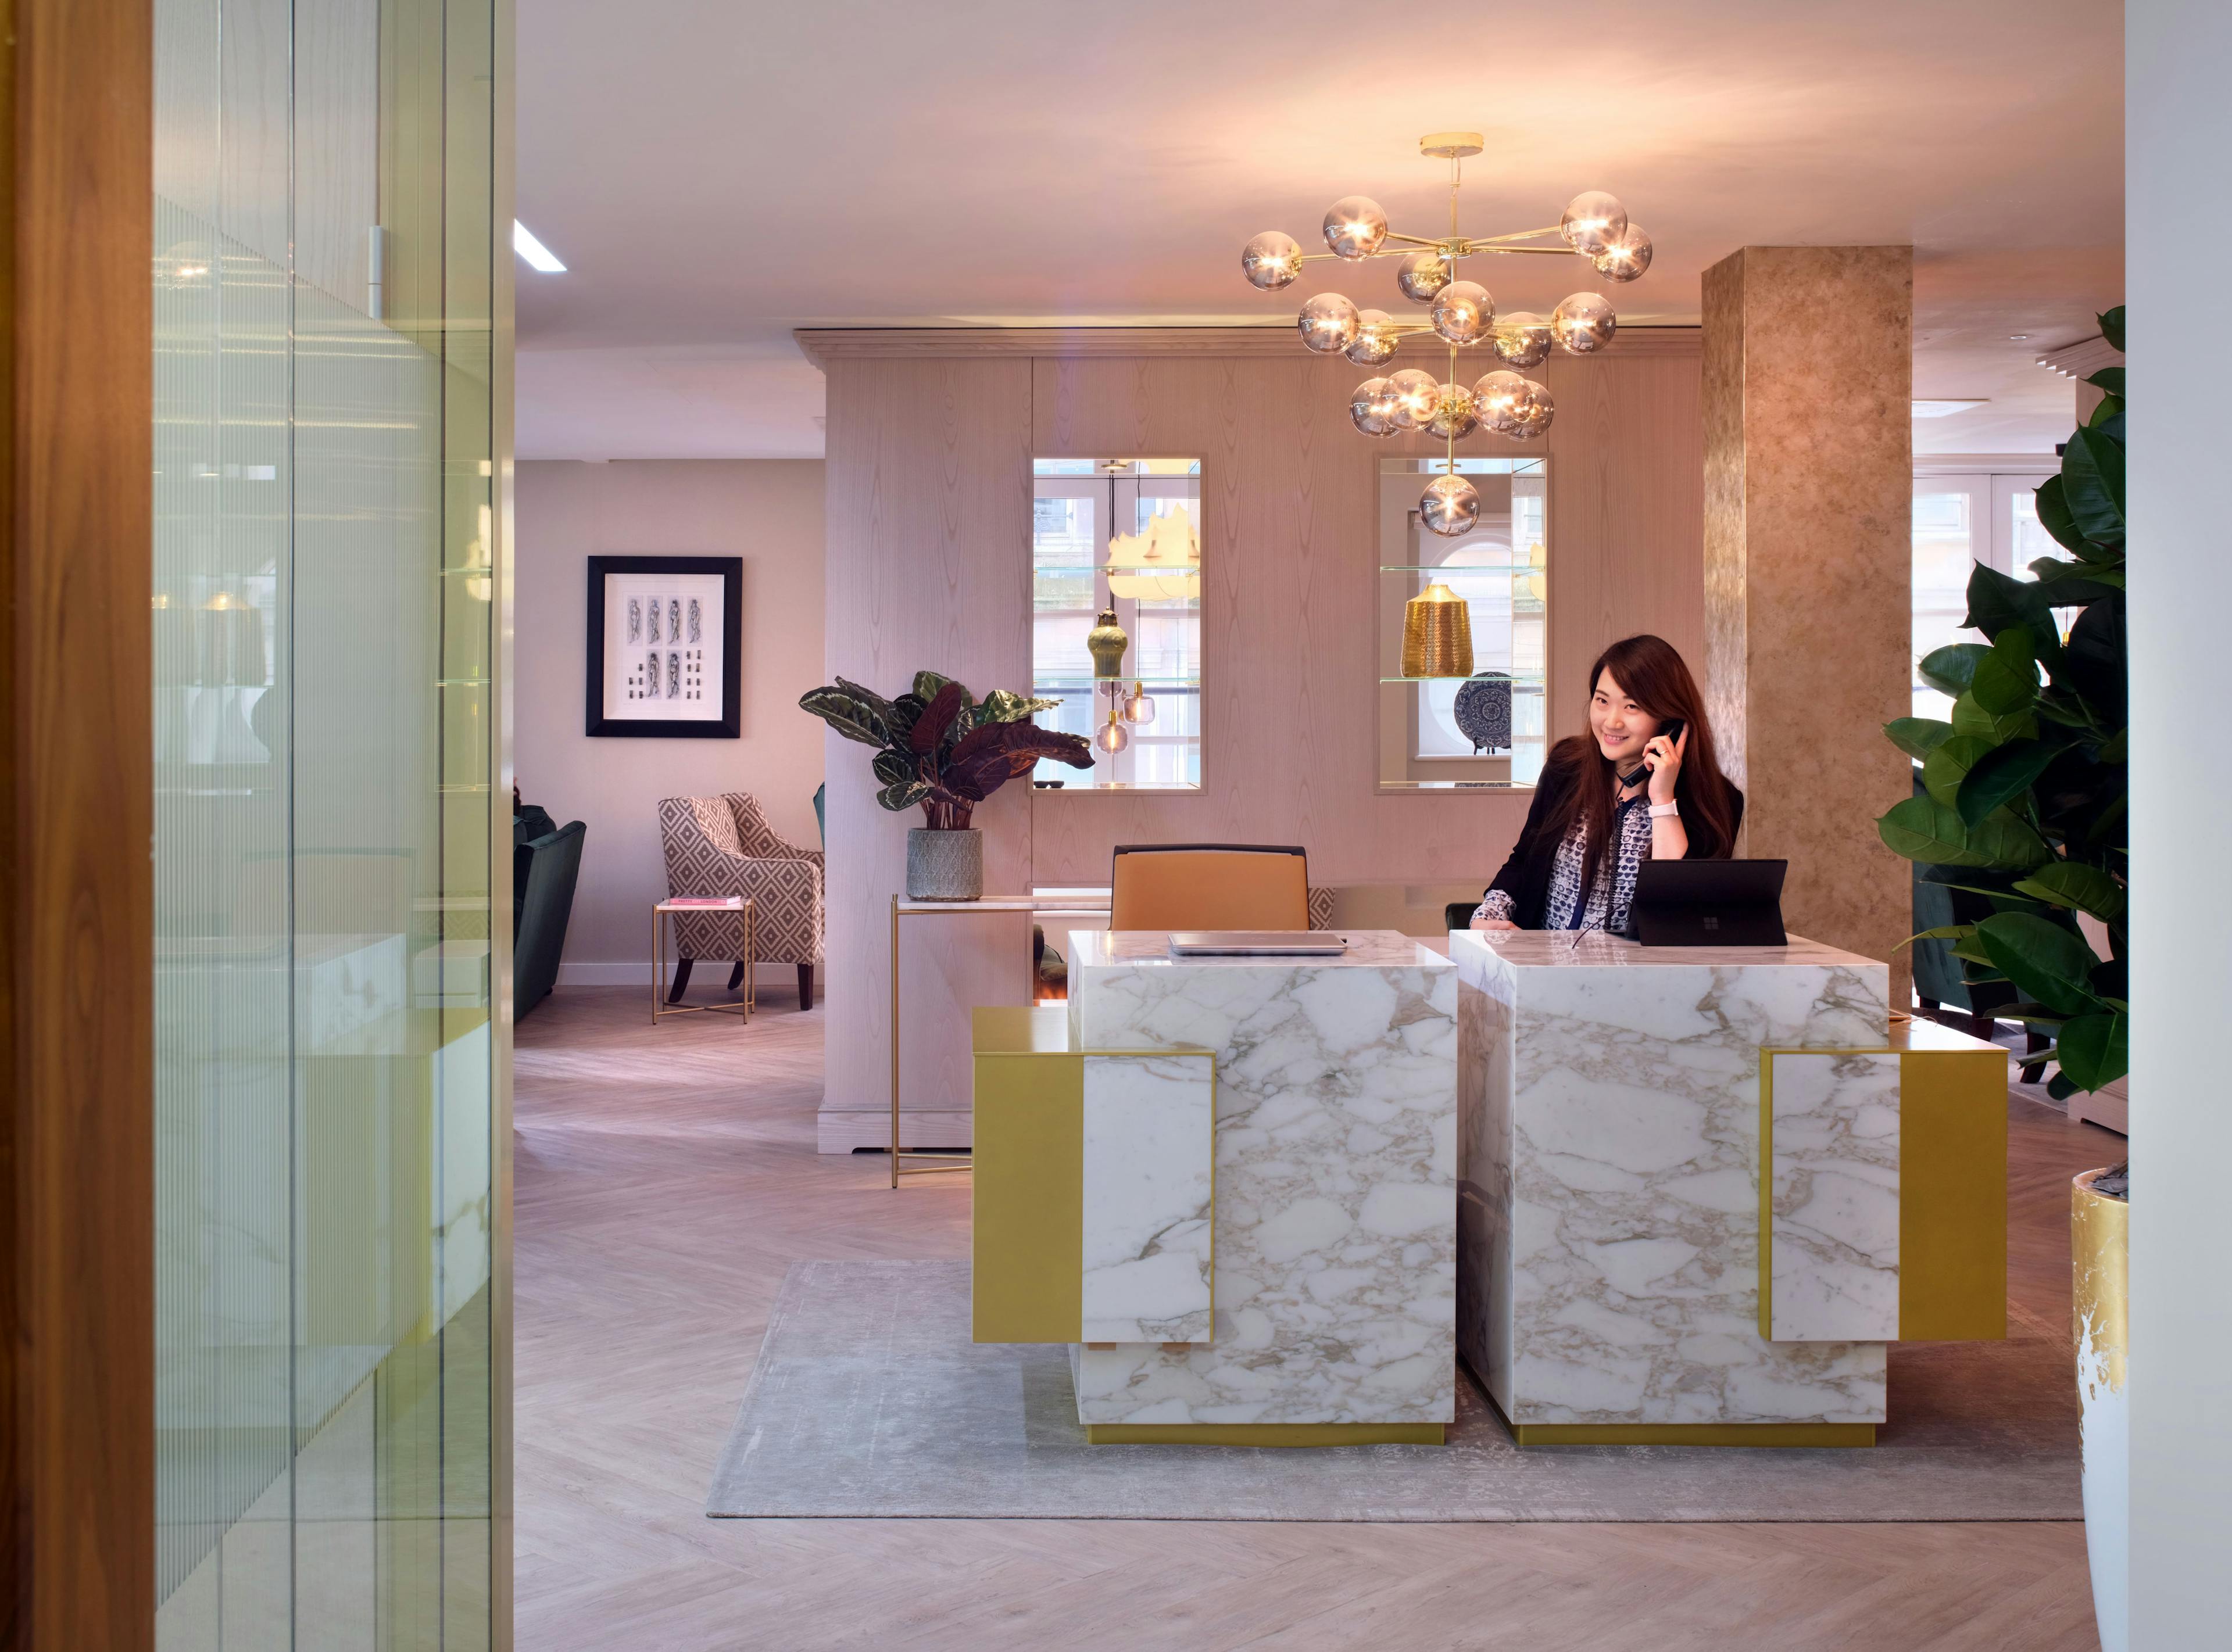 Mayfair – 52 Person Office - Hanover Square